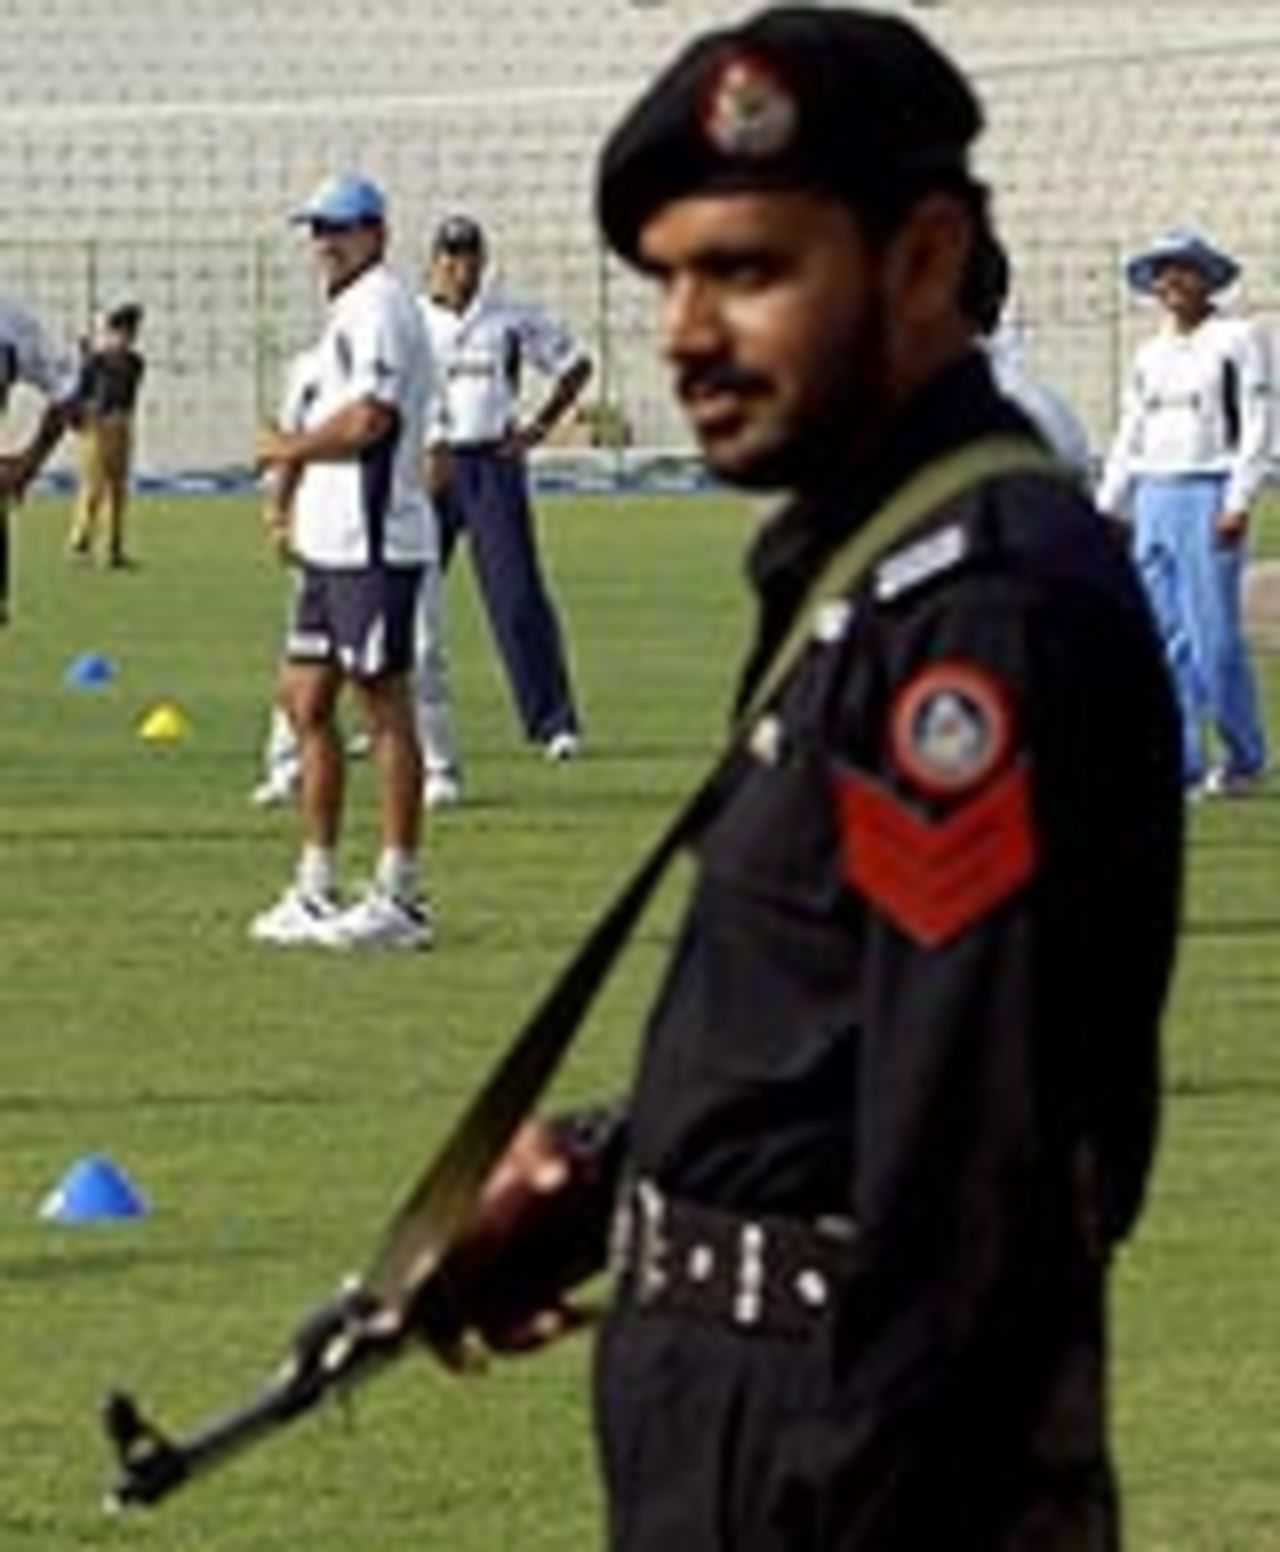 A Pakistani policeman guards the Indian team, Peshawar, March 19, 2003